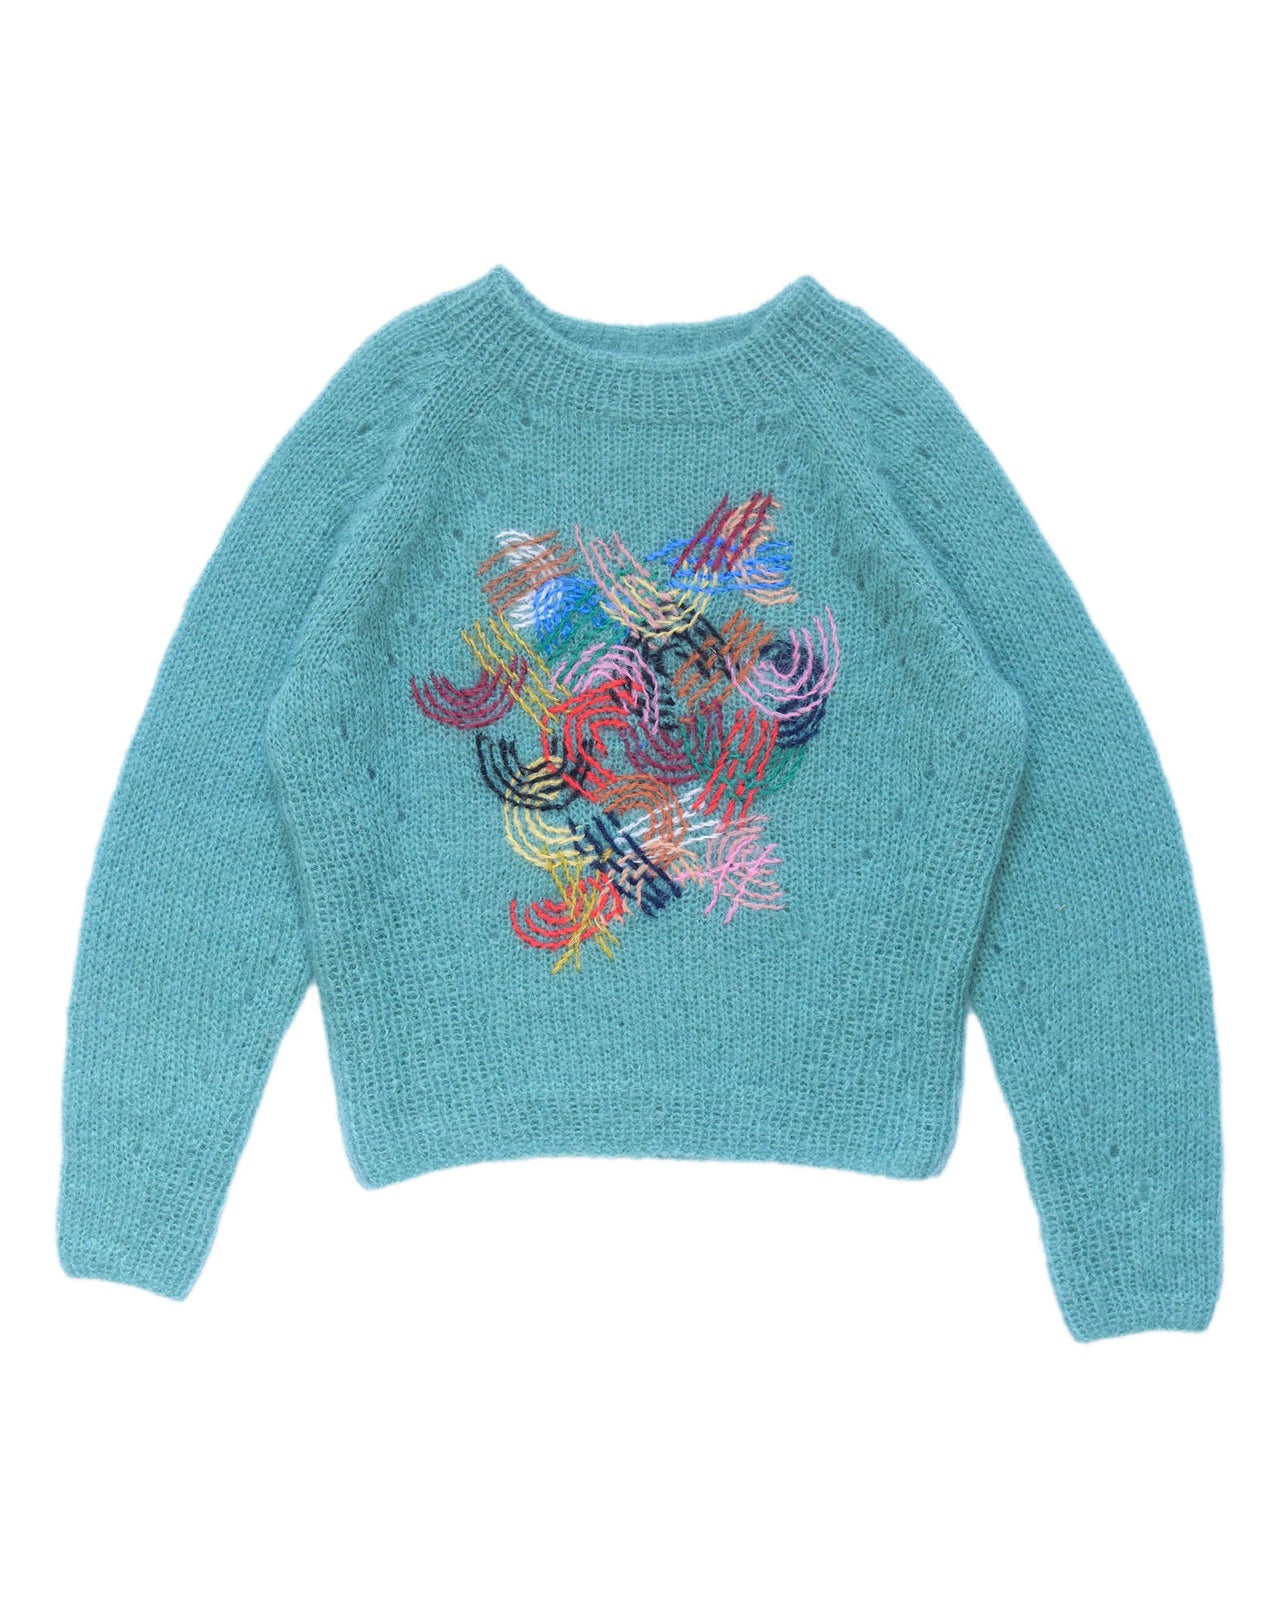 Teal mohair sweater laid flat on white background. The sweater has colourful abstract embroidered lines in its center. 